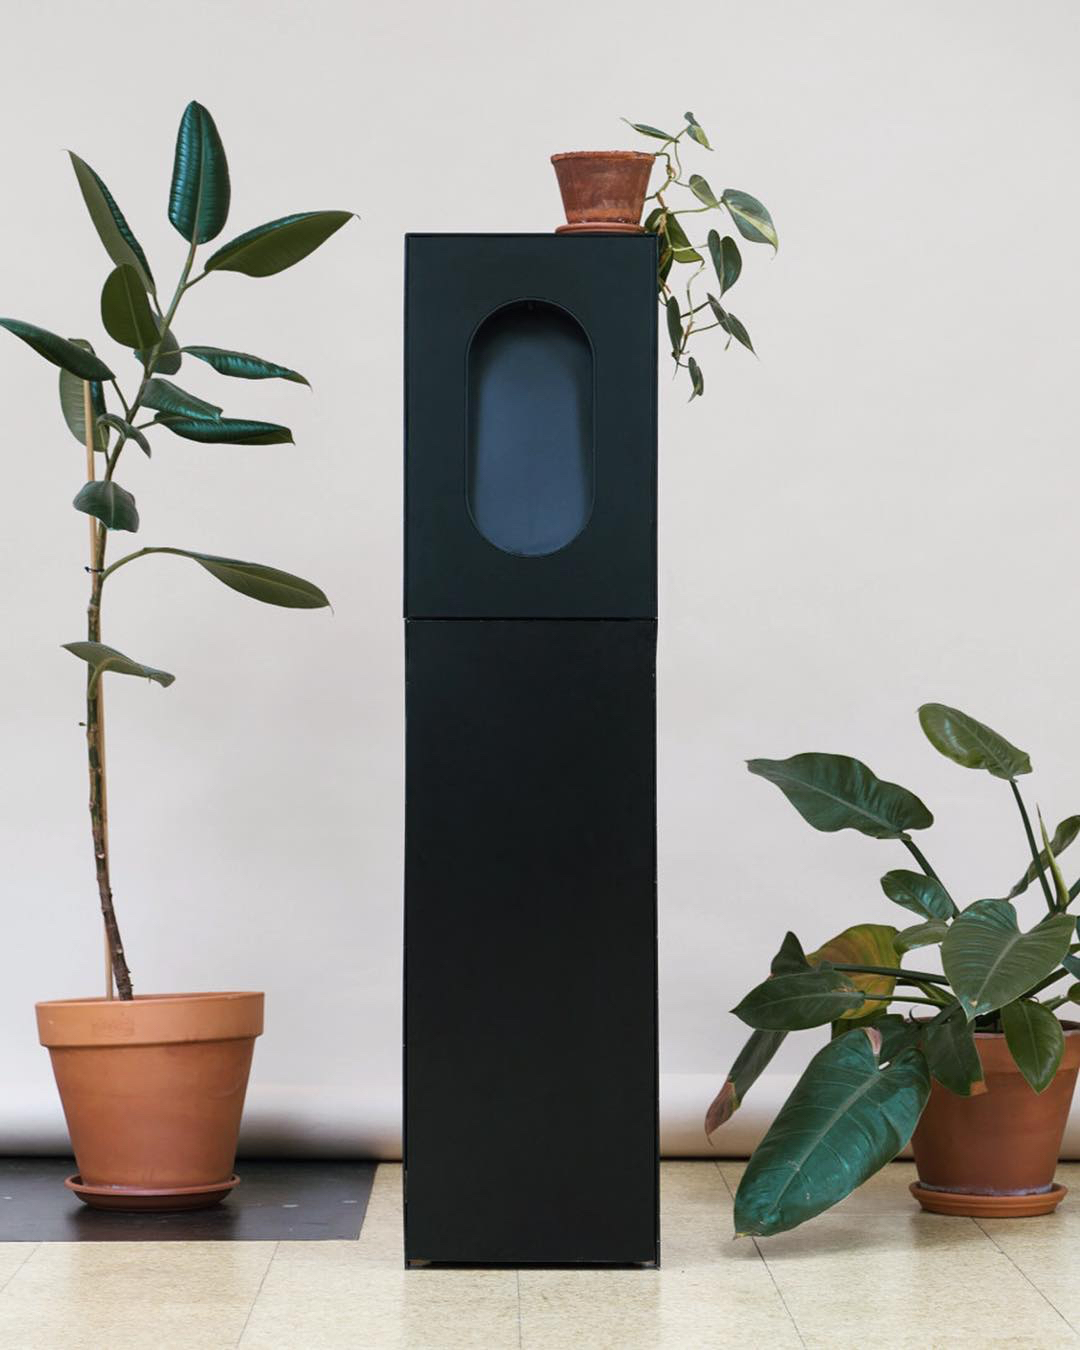 The Apas Monolith Water Cooler Simplifies the Design of Hydration